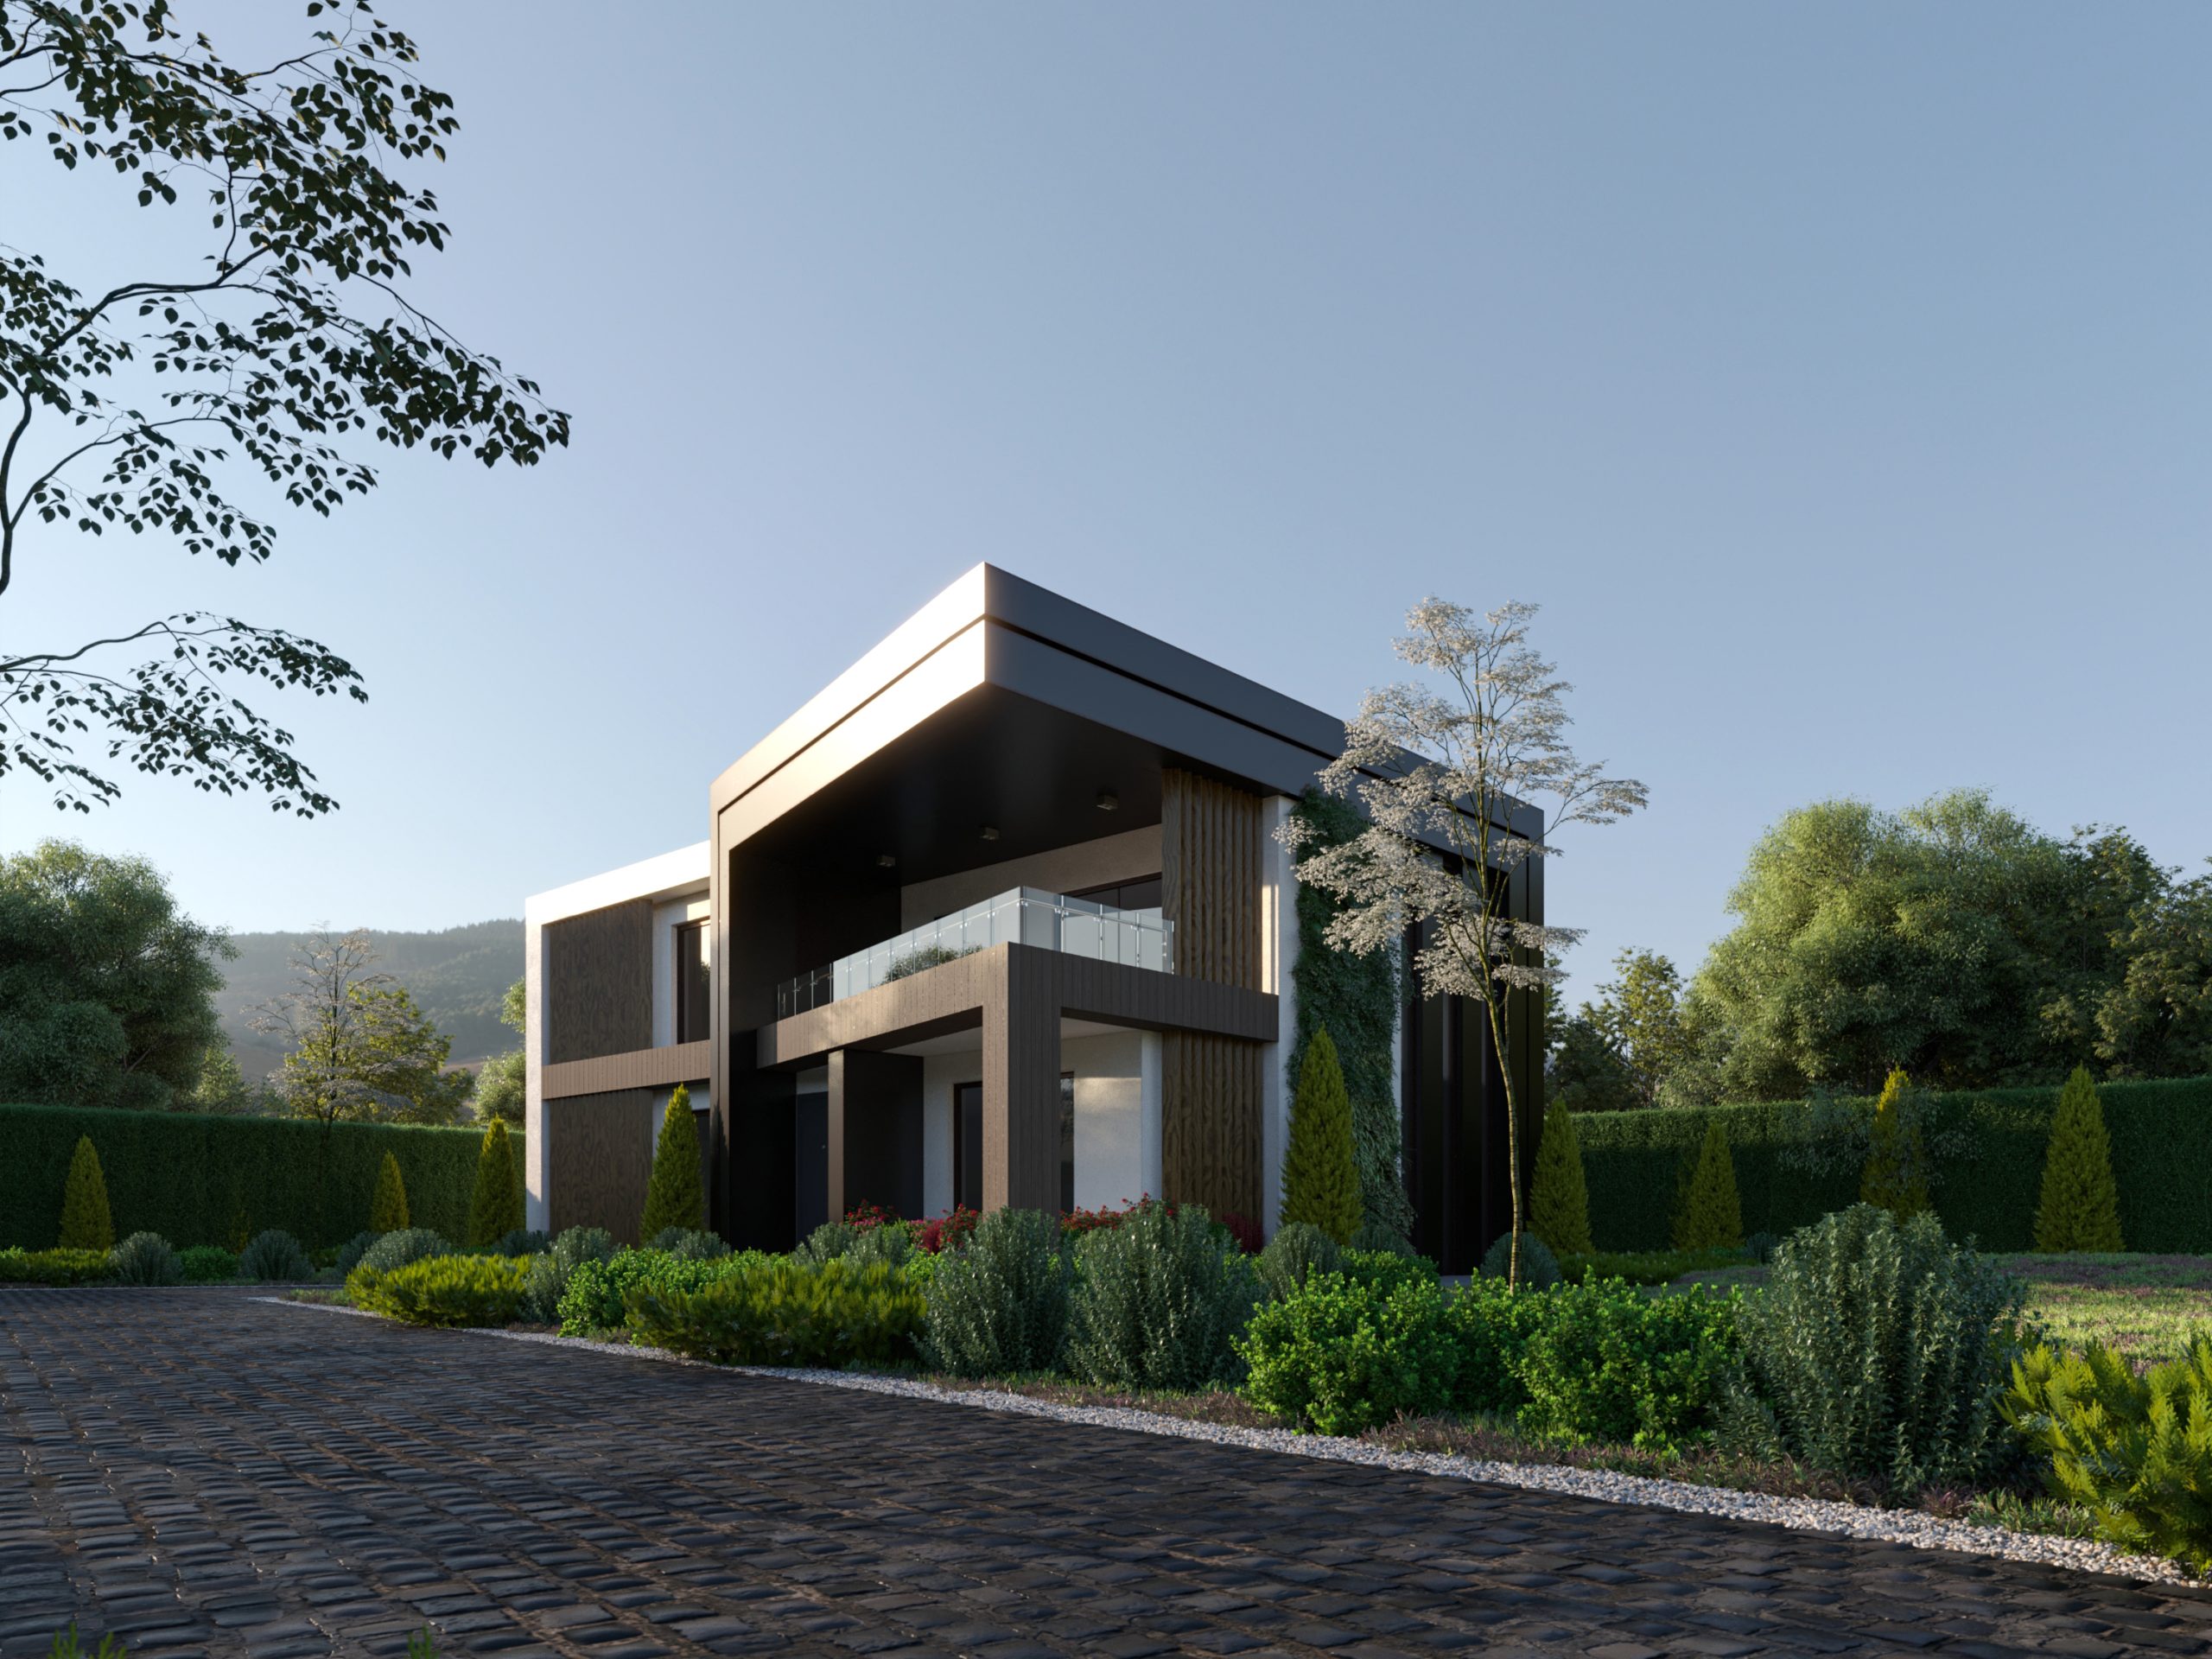 MODERN EXTERIOR home - swimming pool - render - hrarchz - black and white -wood